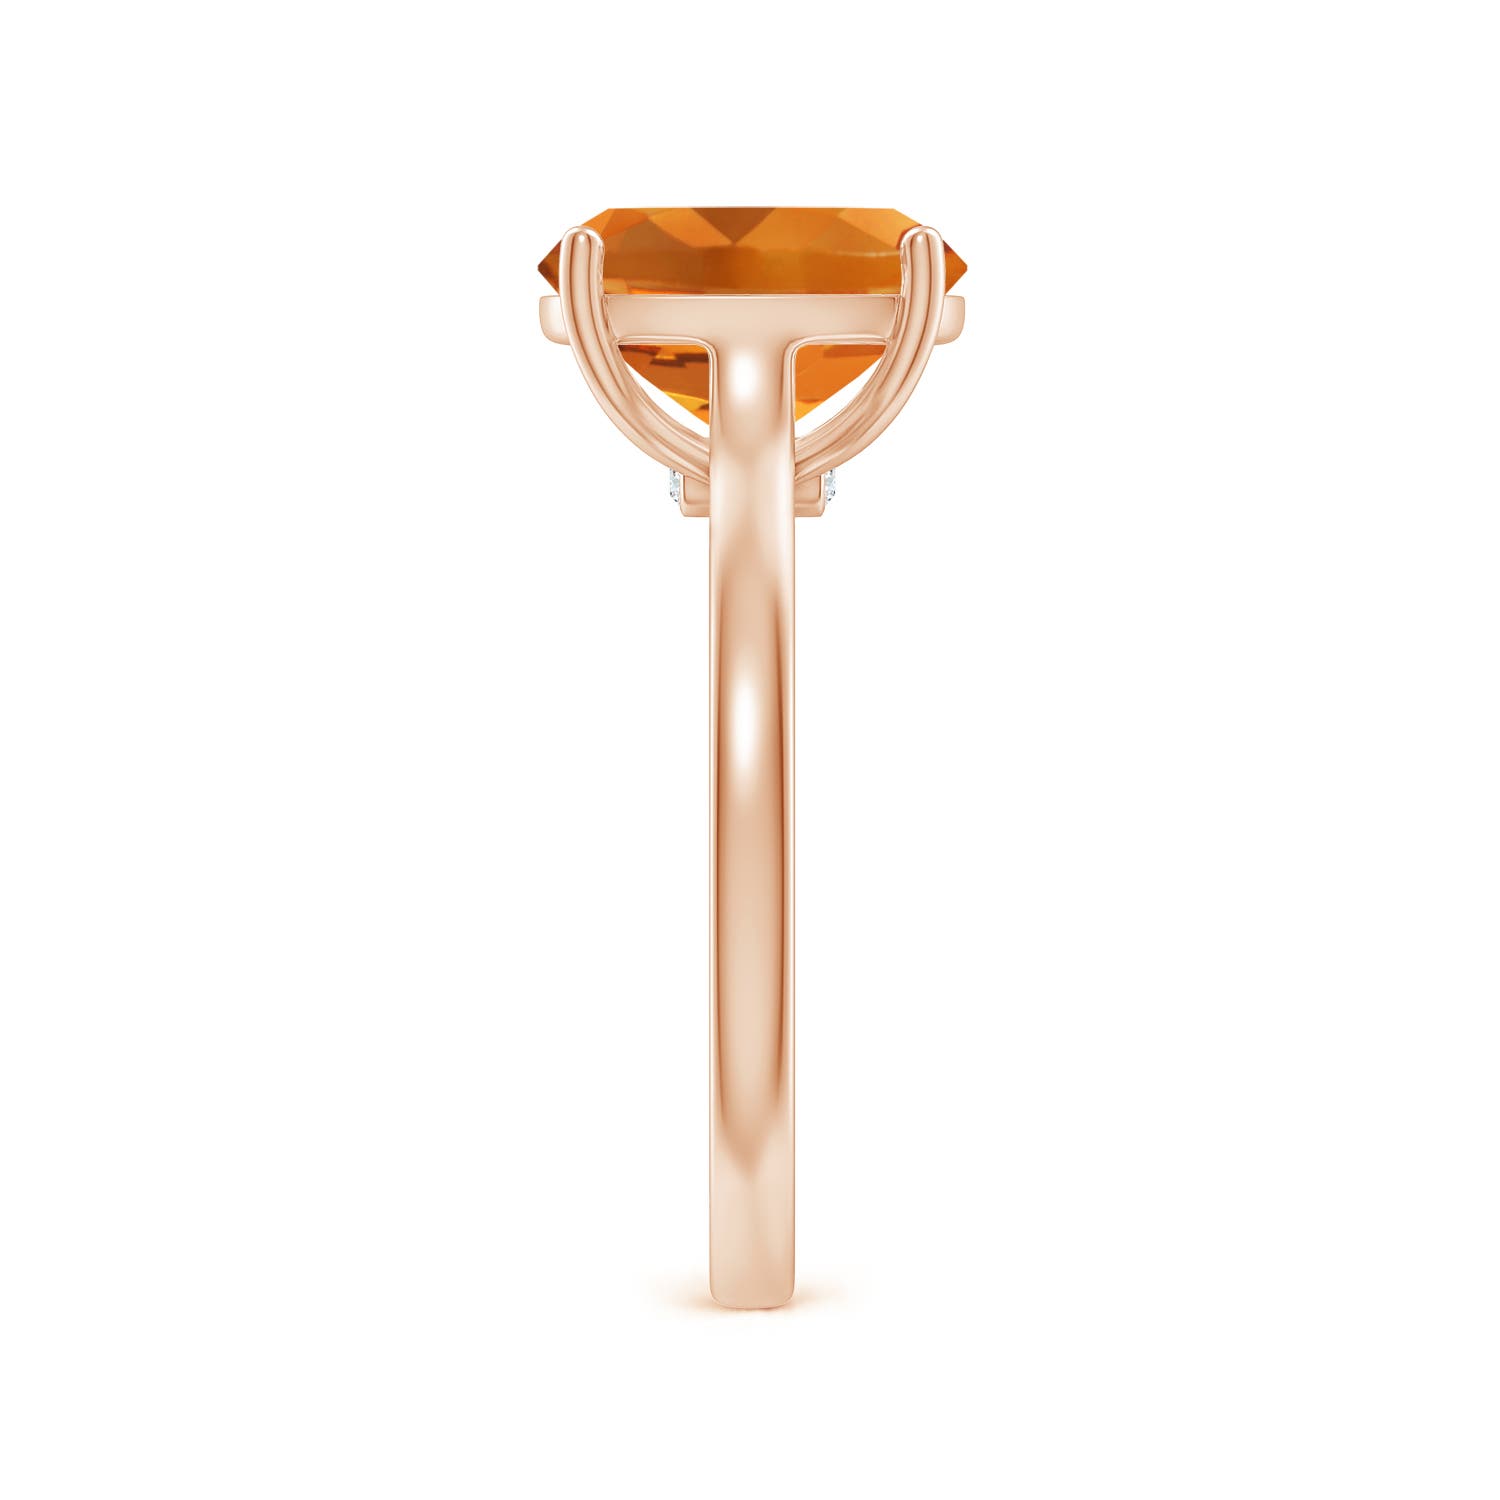 AAA - Citrine / 2.67 CT / 14 KT Rose Gold